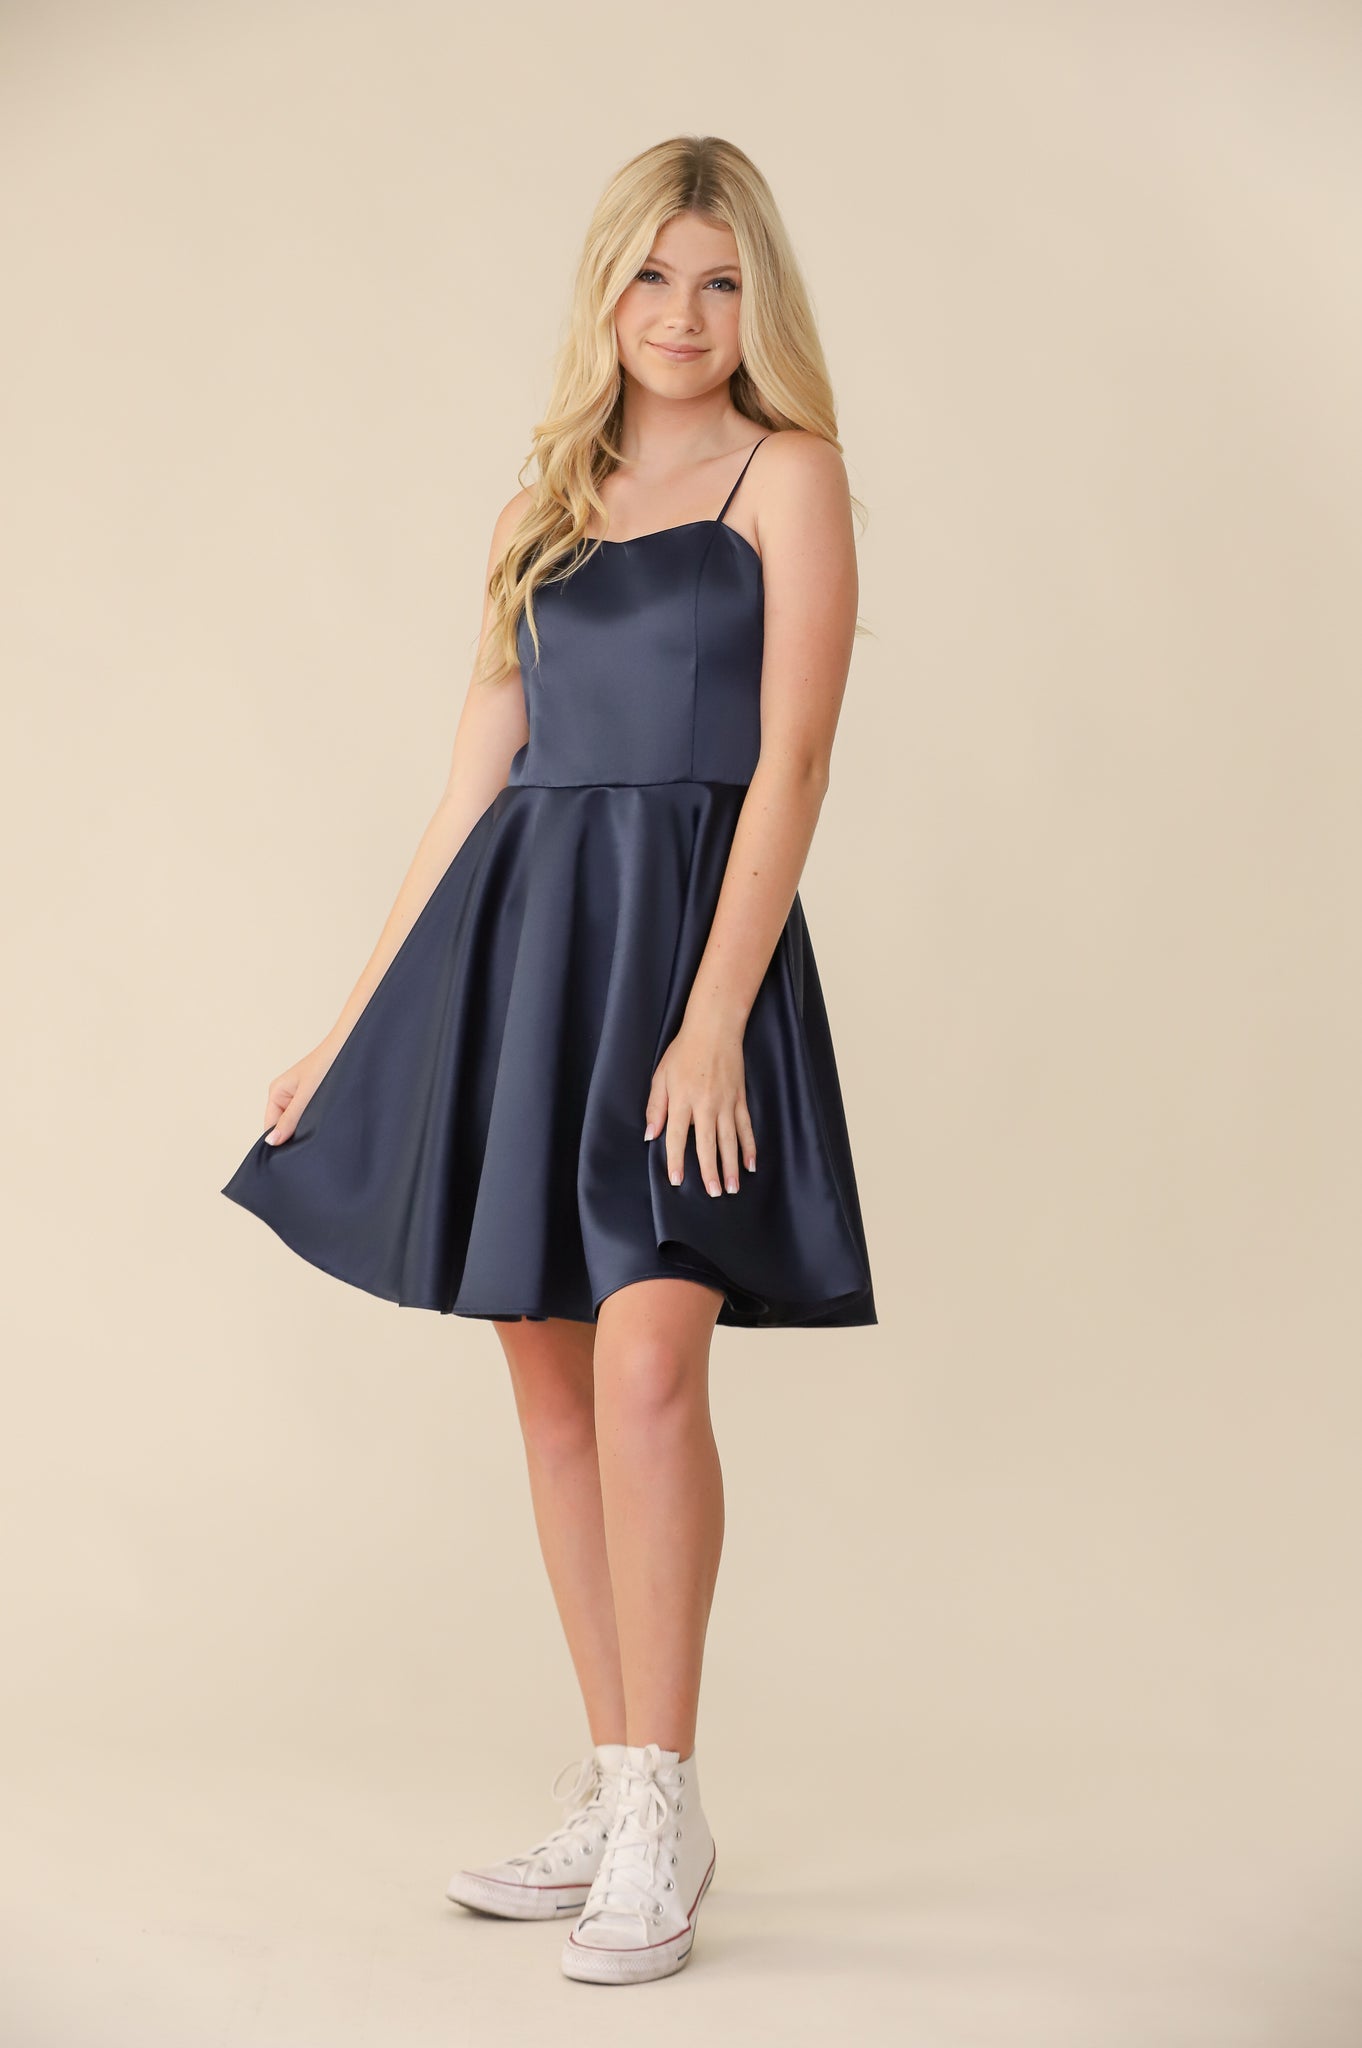 Blonde girl in a Un Deux Trois fit and flare navy satin dress.